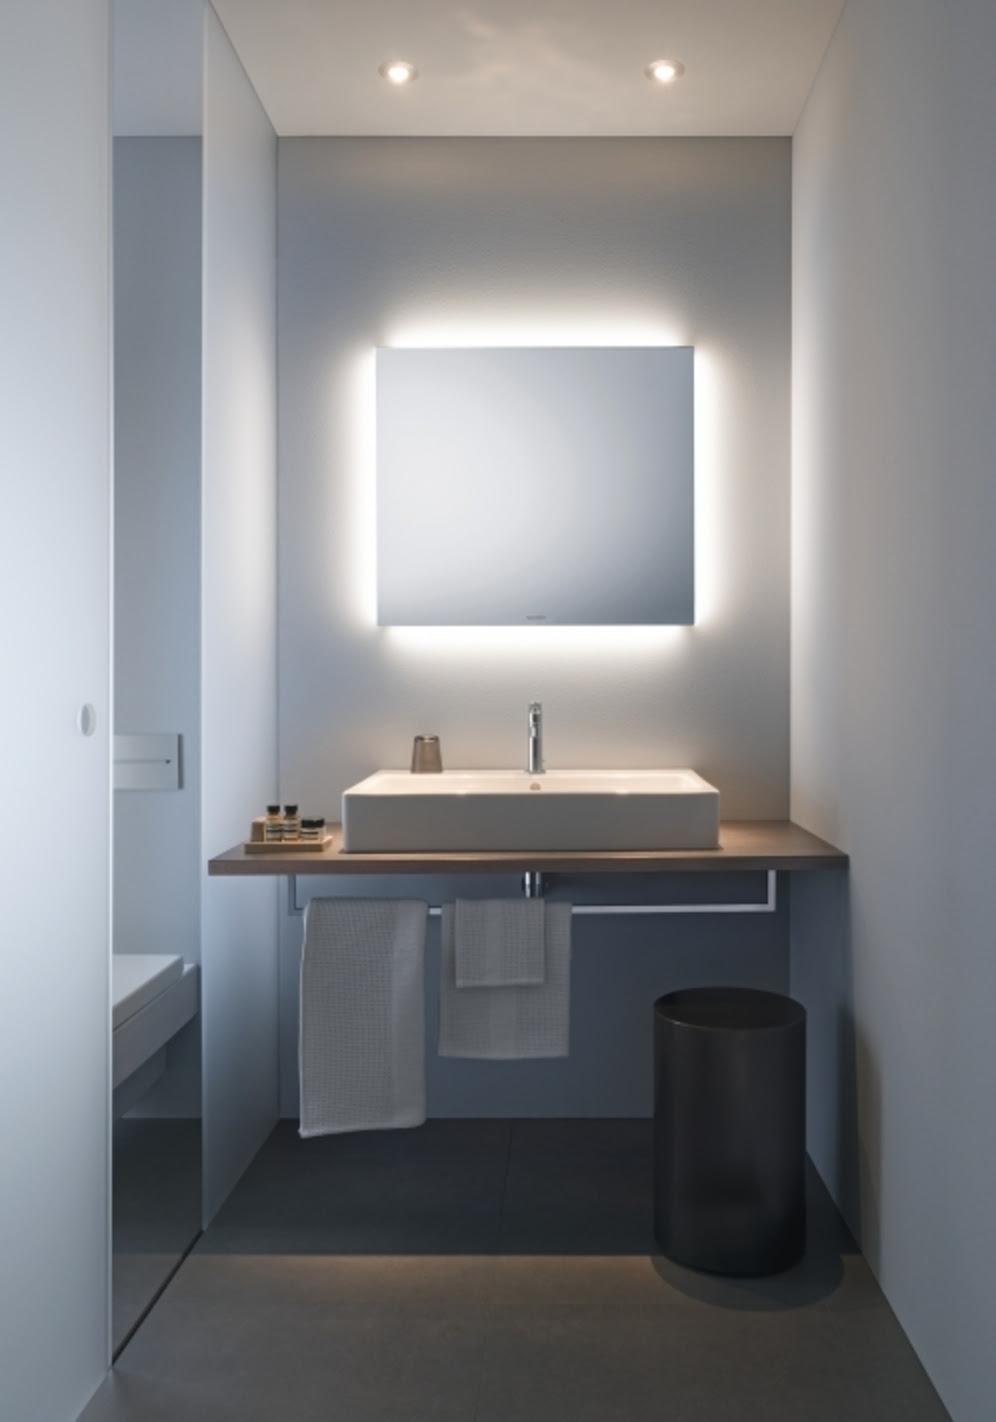 Duravit has expanded its program of lighted mirrors with two new products, including a unit with indirect ambient light on all four sides and another with illumination on the right and left.